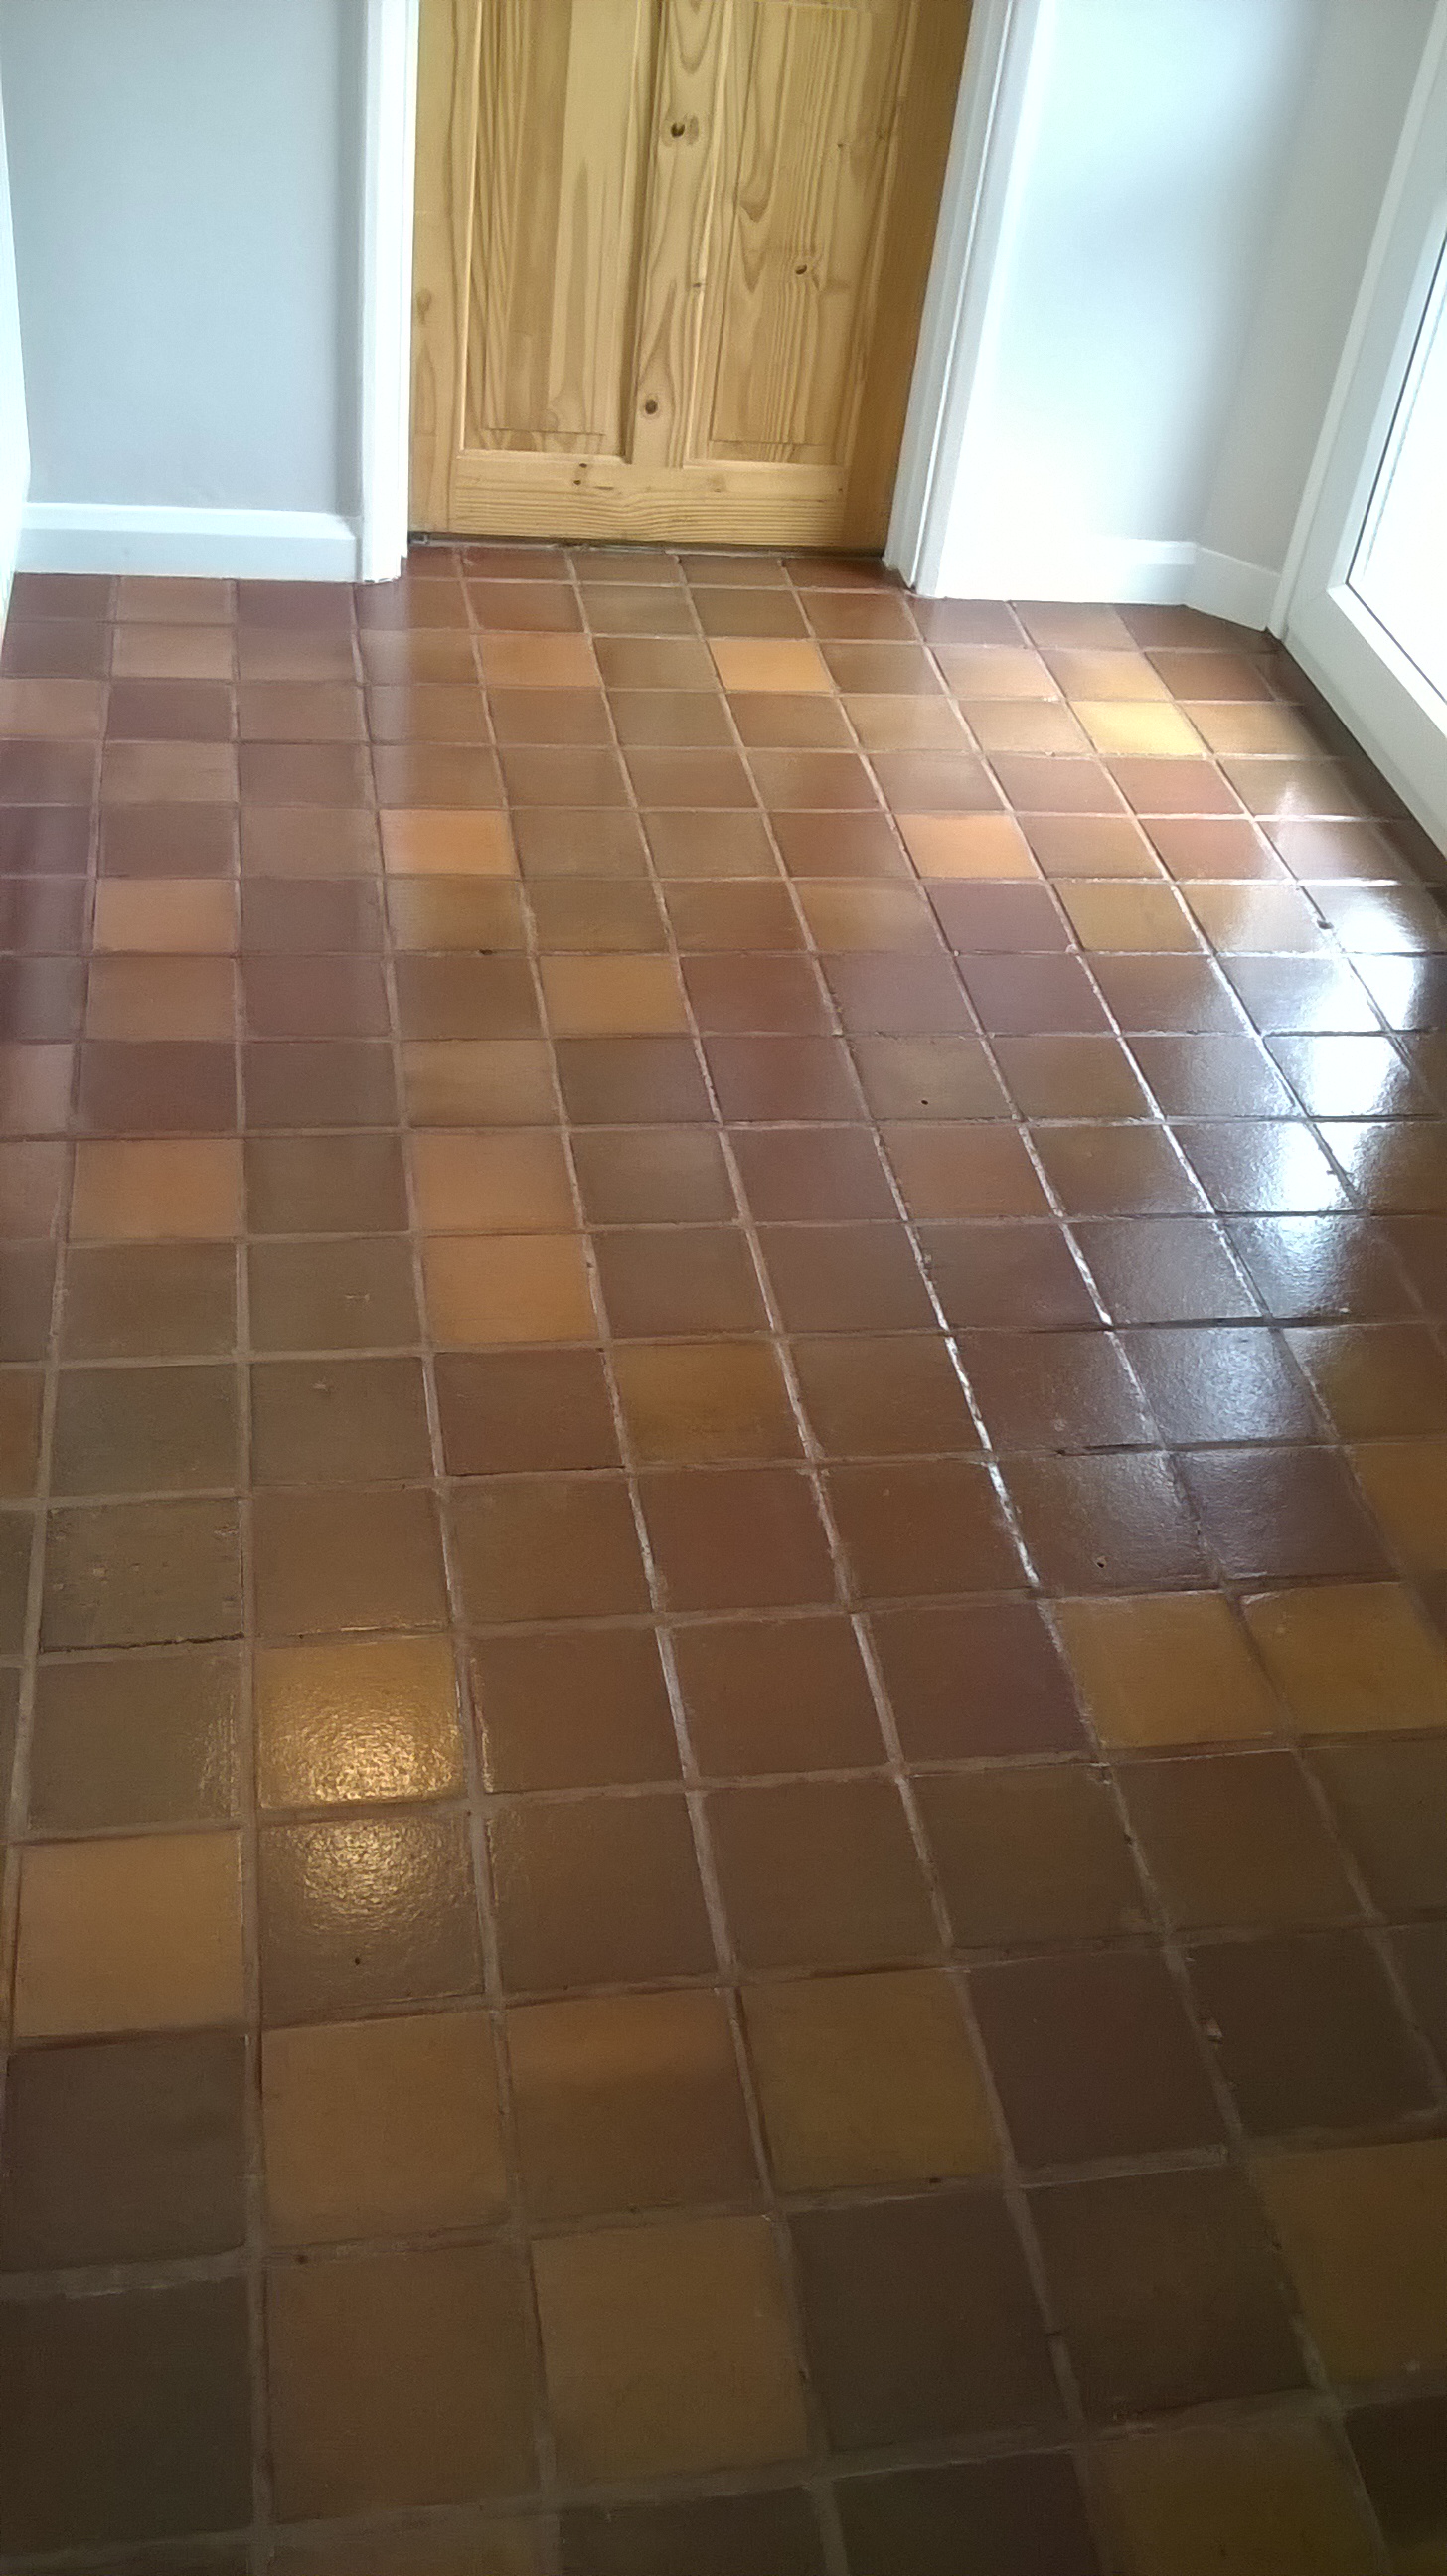 Quarry Tiled Kitchen After Cleaning in Tutbury Burton on Trent